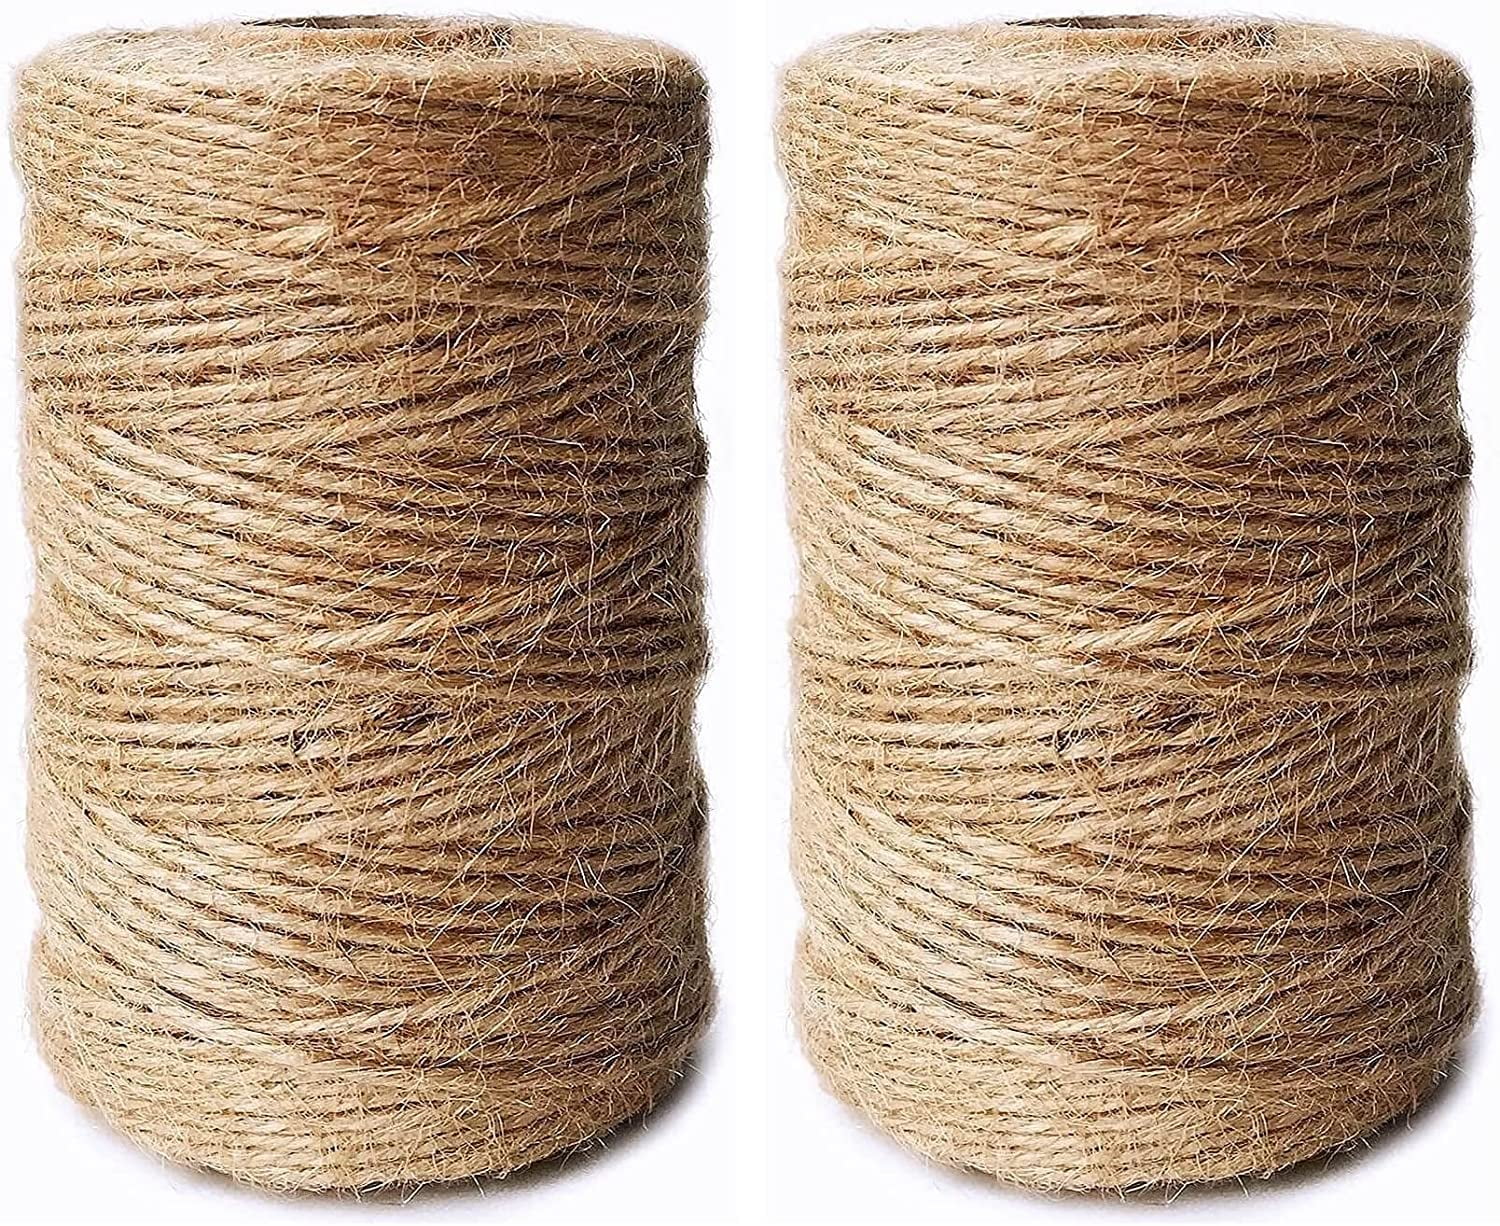 100m Cotton Crafts Rope Long/100Yard Cord String Macrame Home